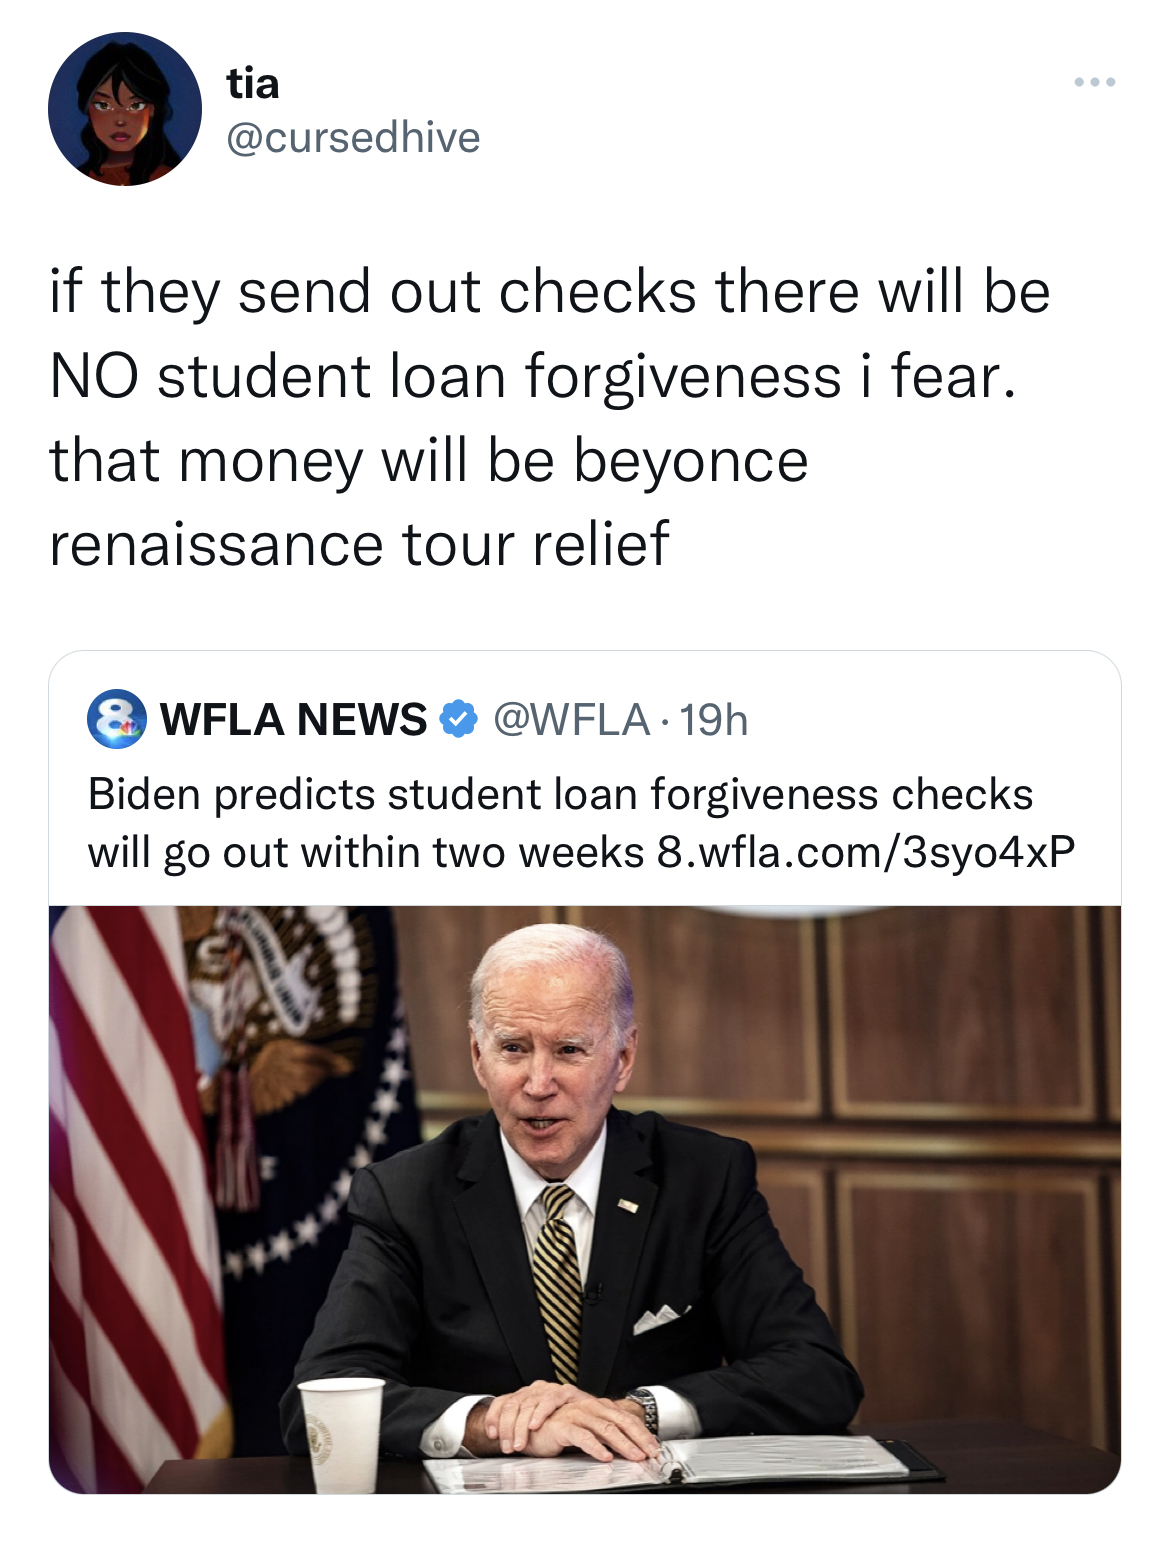 celeb roasts of the week - public speaking - tia if they send out checks there will be No student loan forgiveness i fear. that money will be beyon renaissance tour relief www Wfla News 19h Biden predicts student loan forgiveness checks will go out within